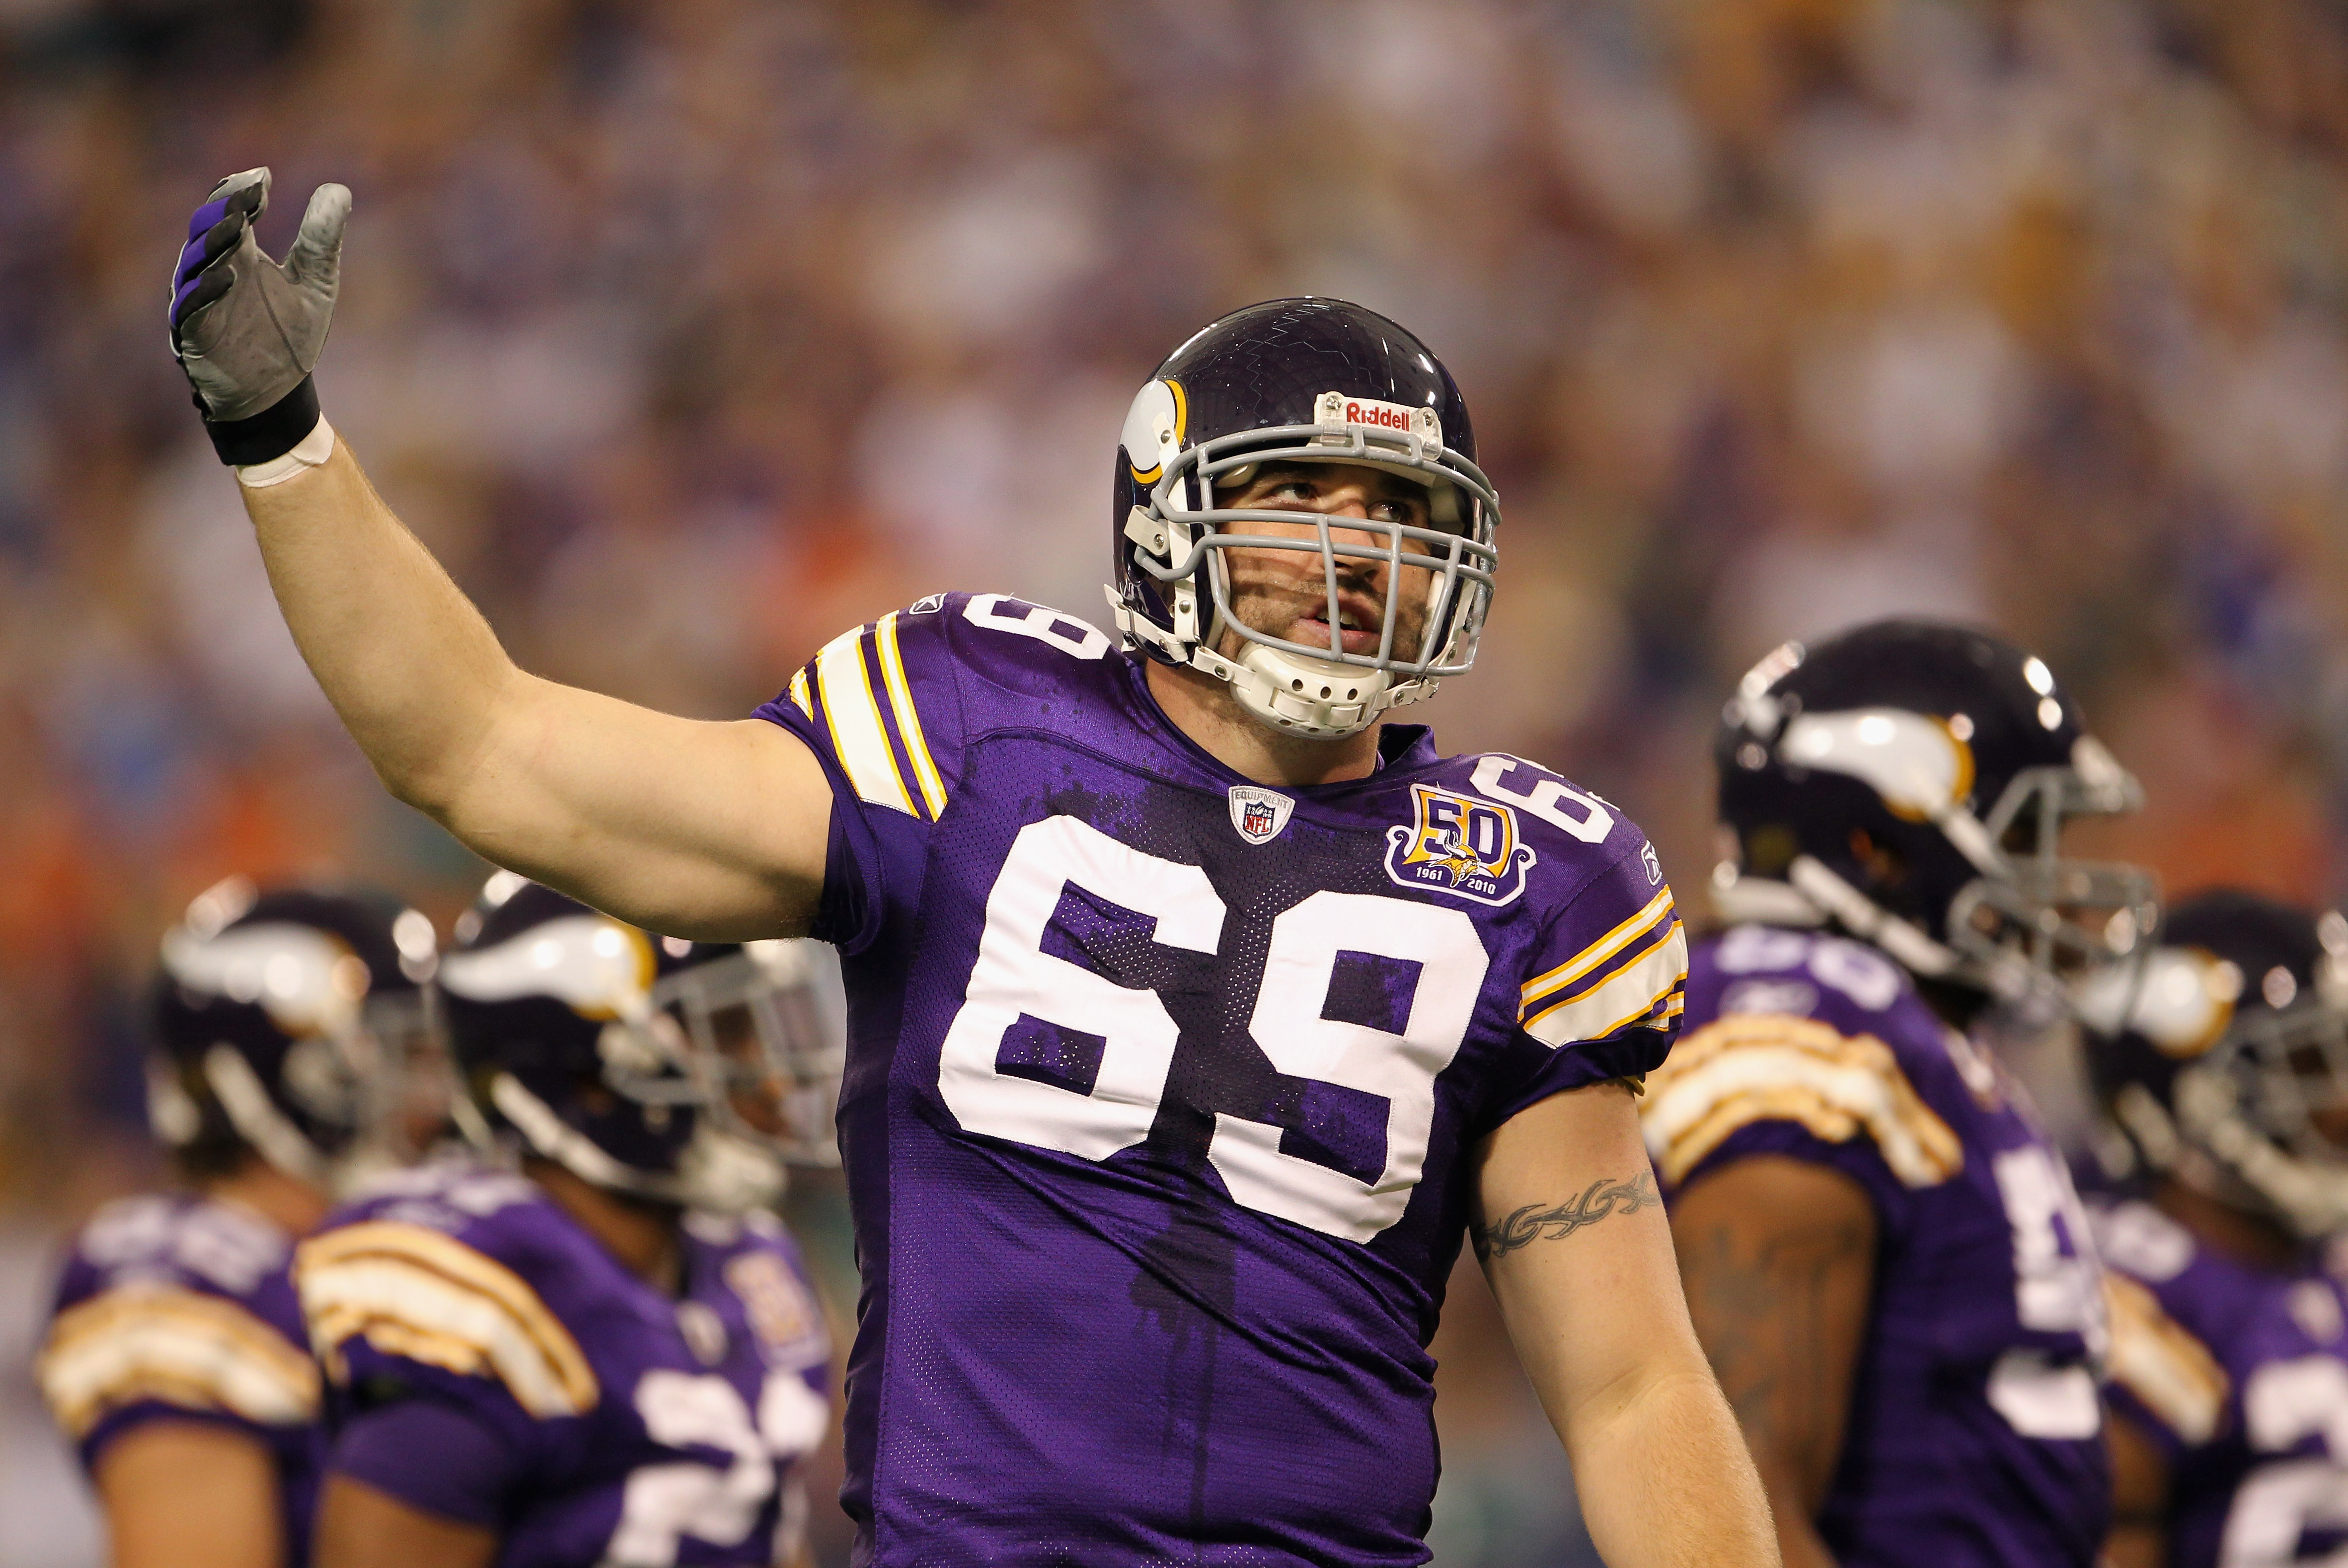 MINNEAPOLIS - SEPTEMBER 19:  Jared Allen #69 of the Minnesota Vikings encourages the crowd during the first half of the game against the Miami Dolphins on September 19, 2010 at Hubert H. Humphrey Metrodome in Minneapolis, Minnesota.  (Photo by Jamie Squir